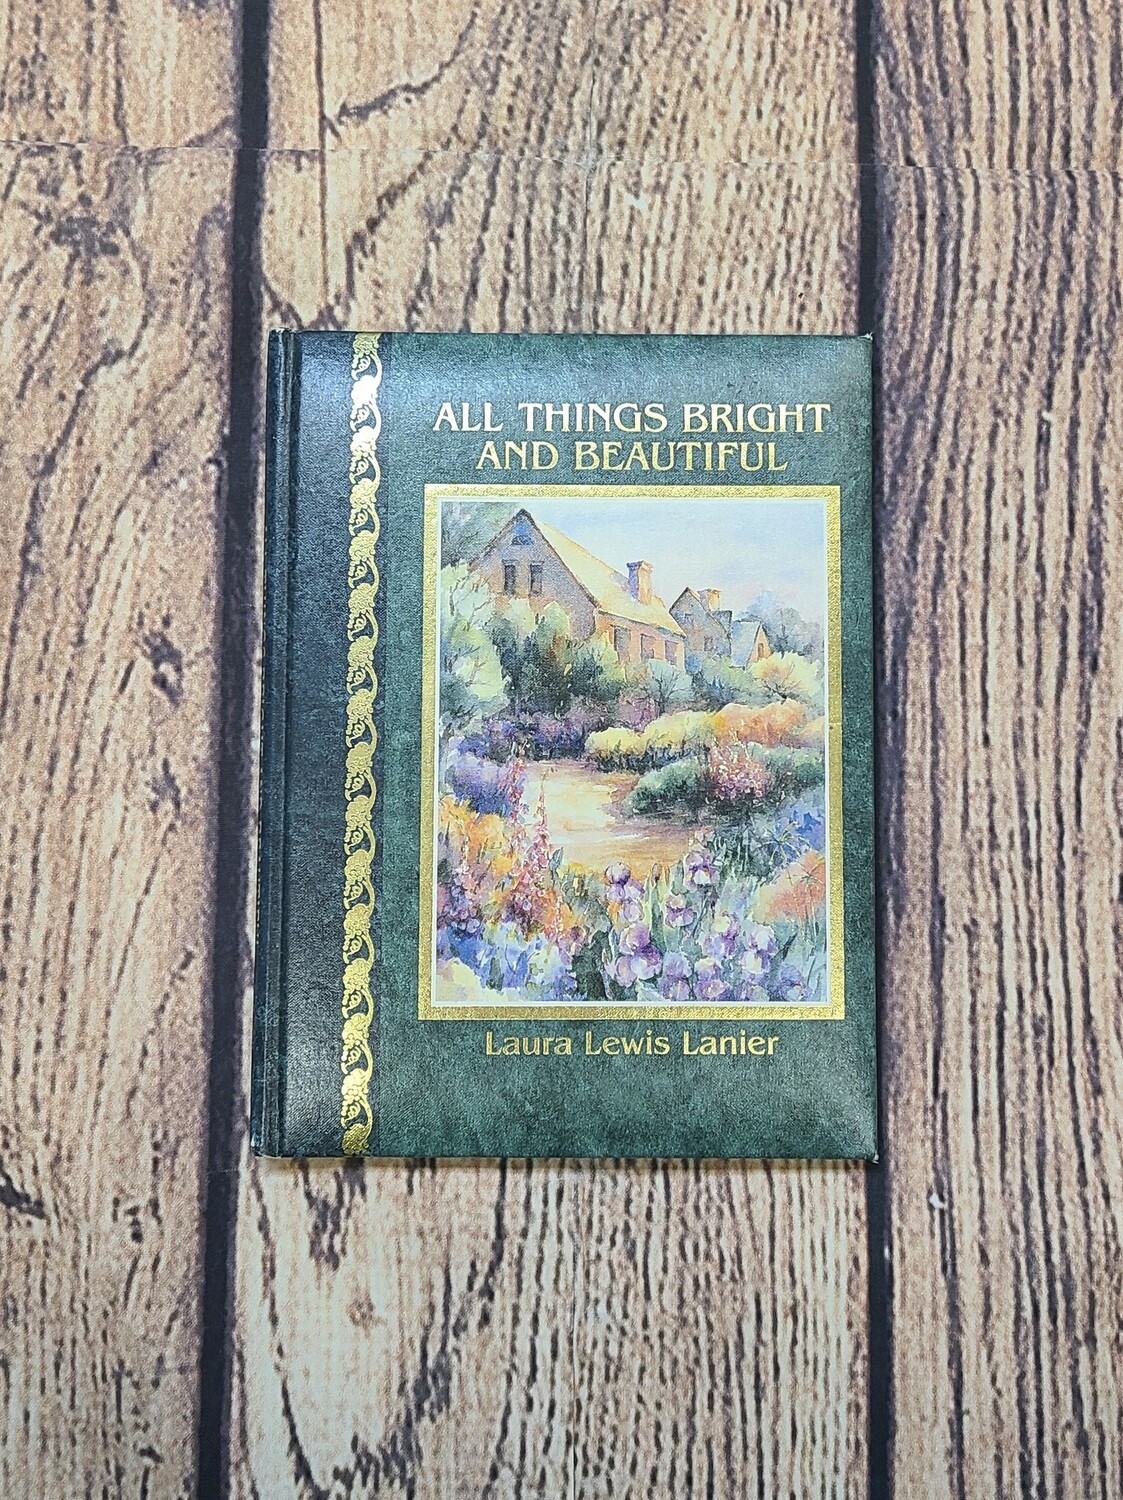 All Things Bright and Beautiful by Laura Lewis Lanier